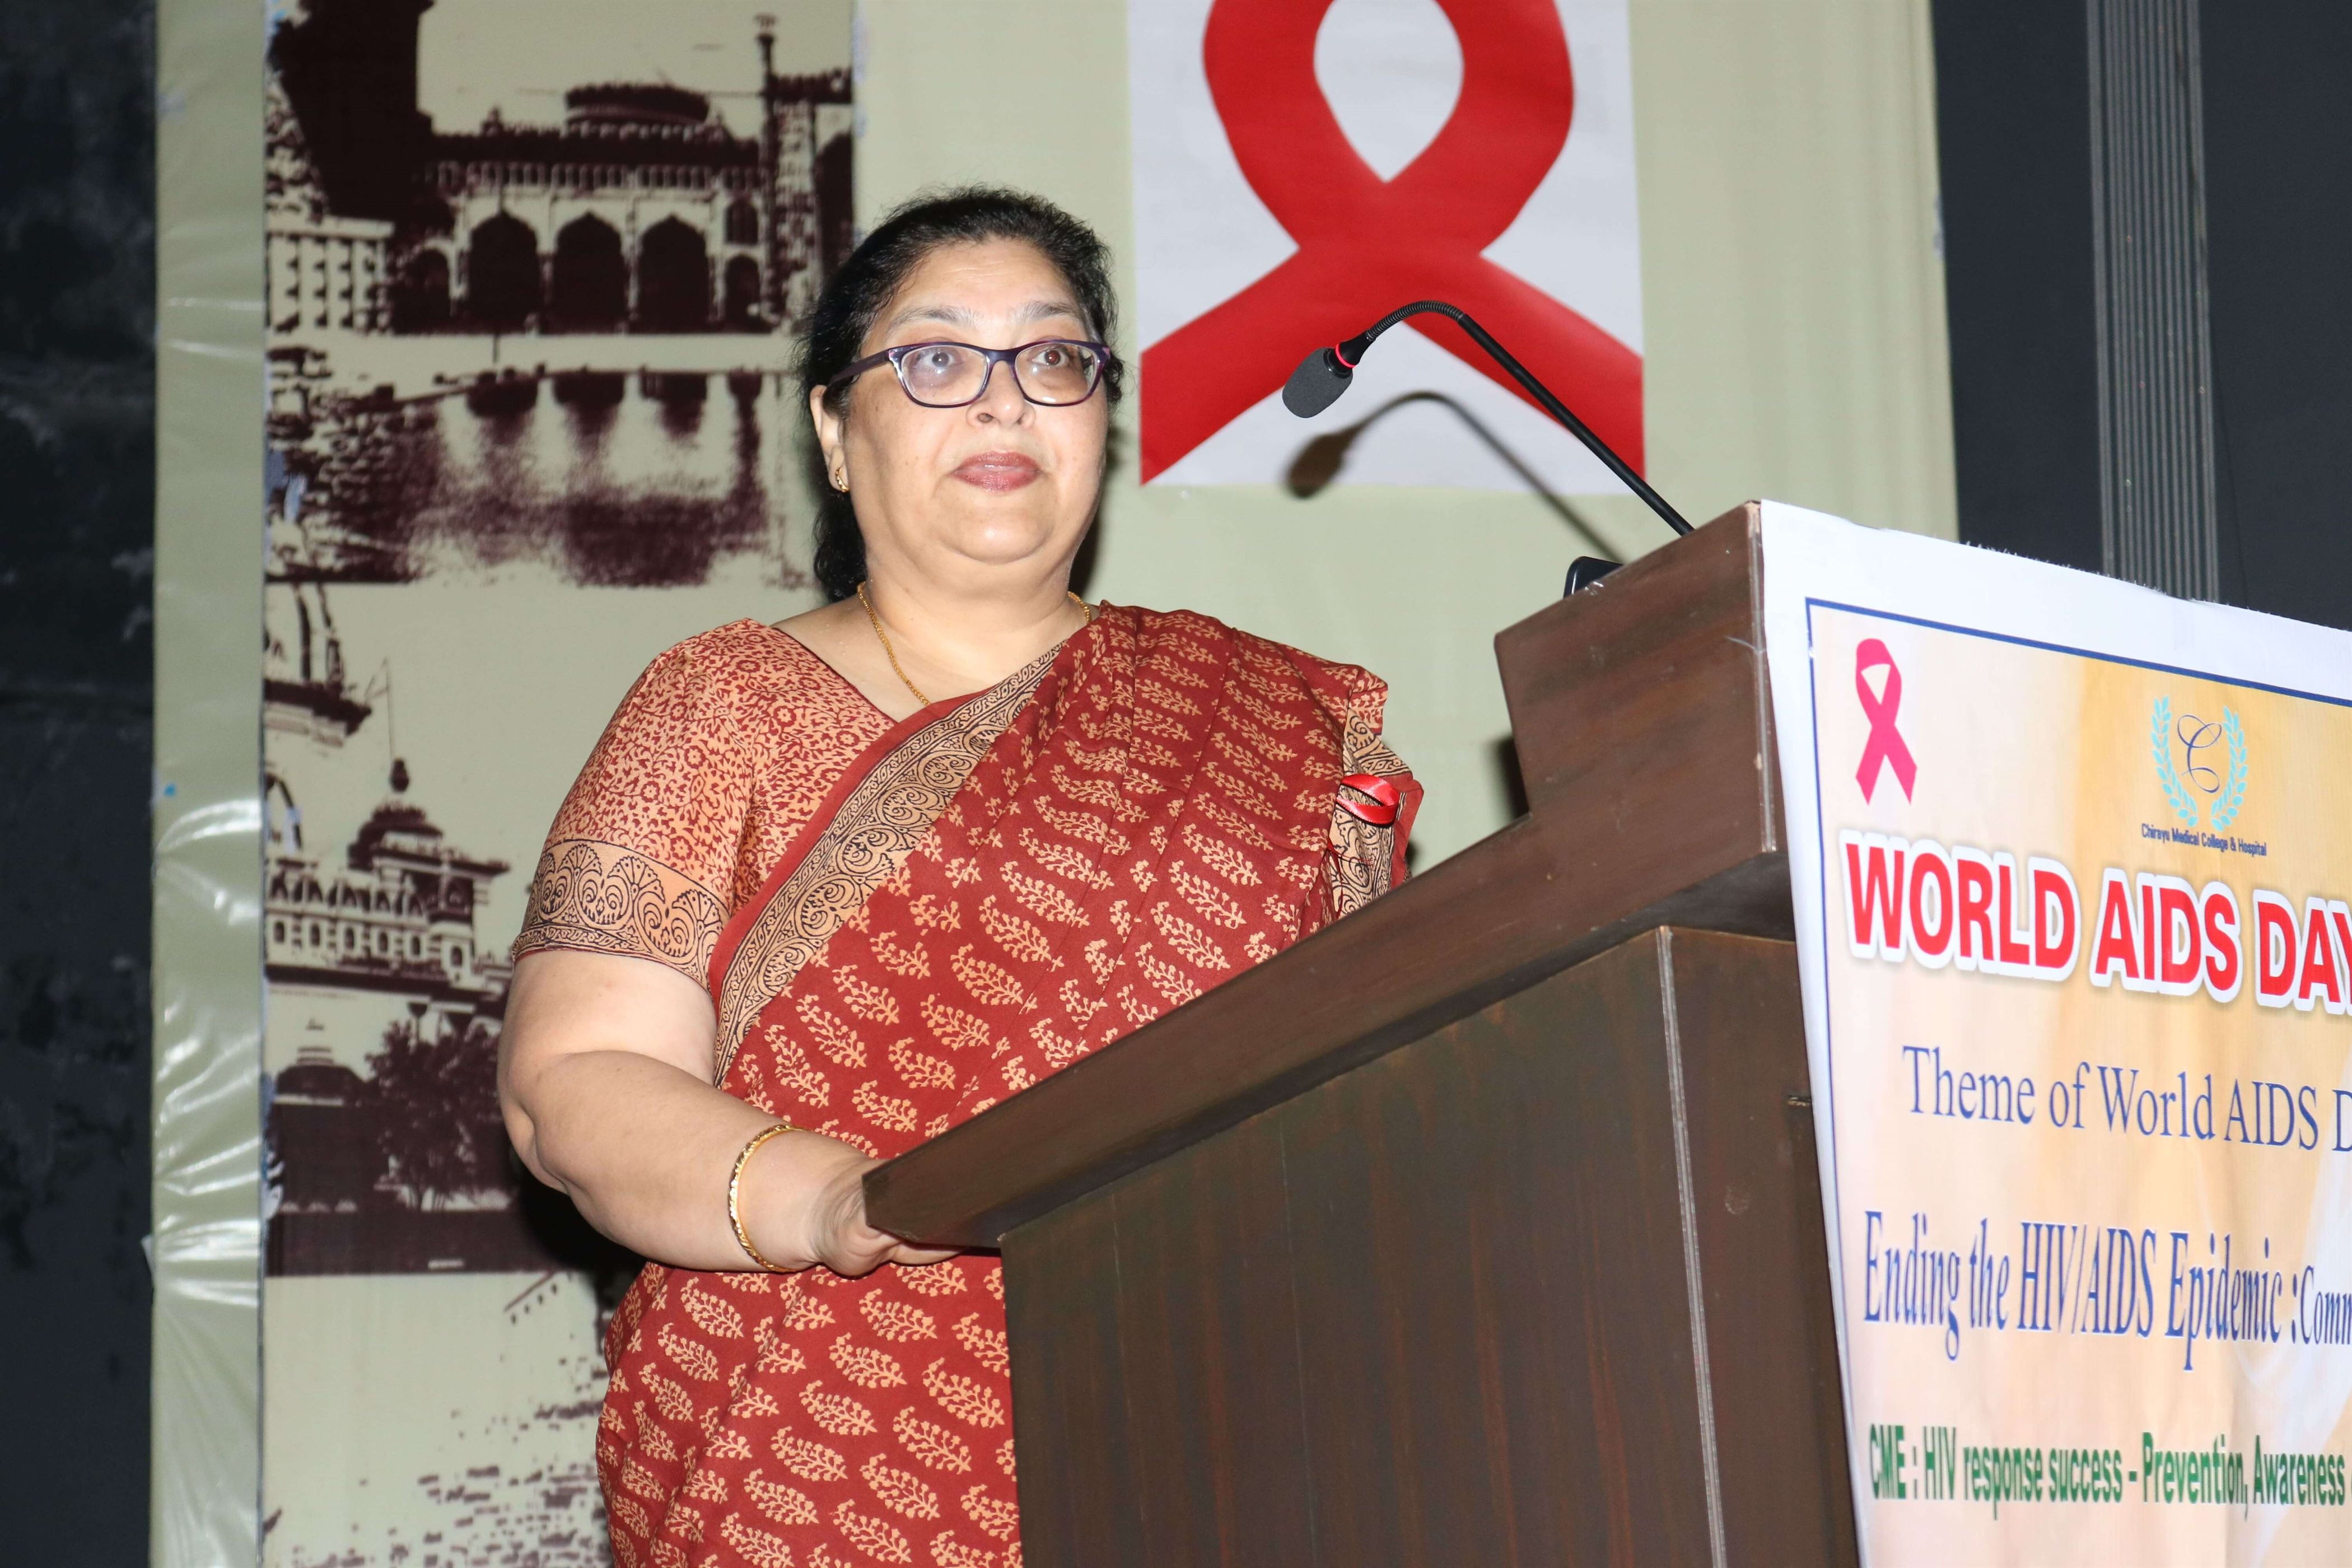 world-aids-day-04-12-19 Course